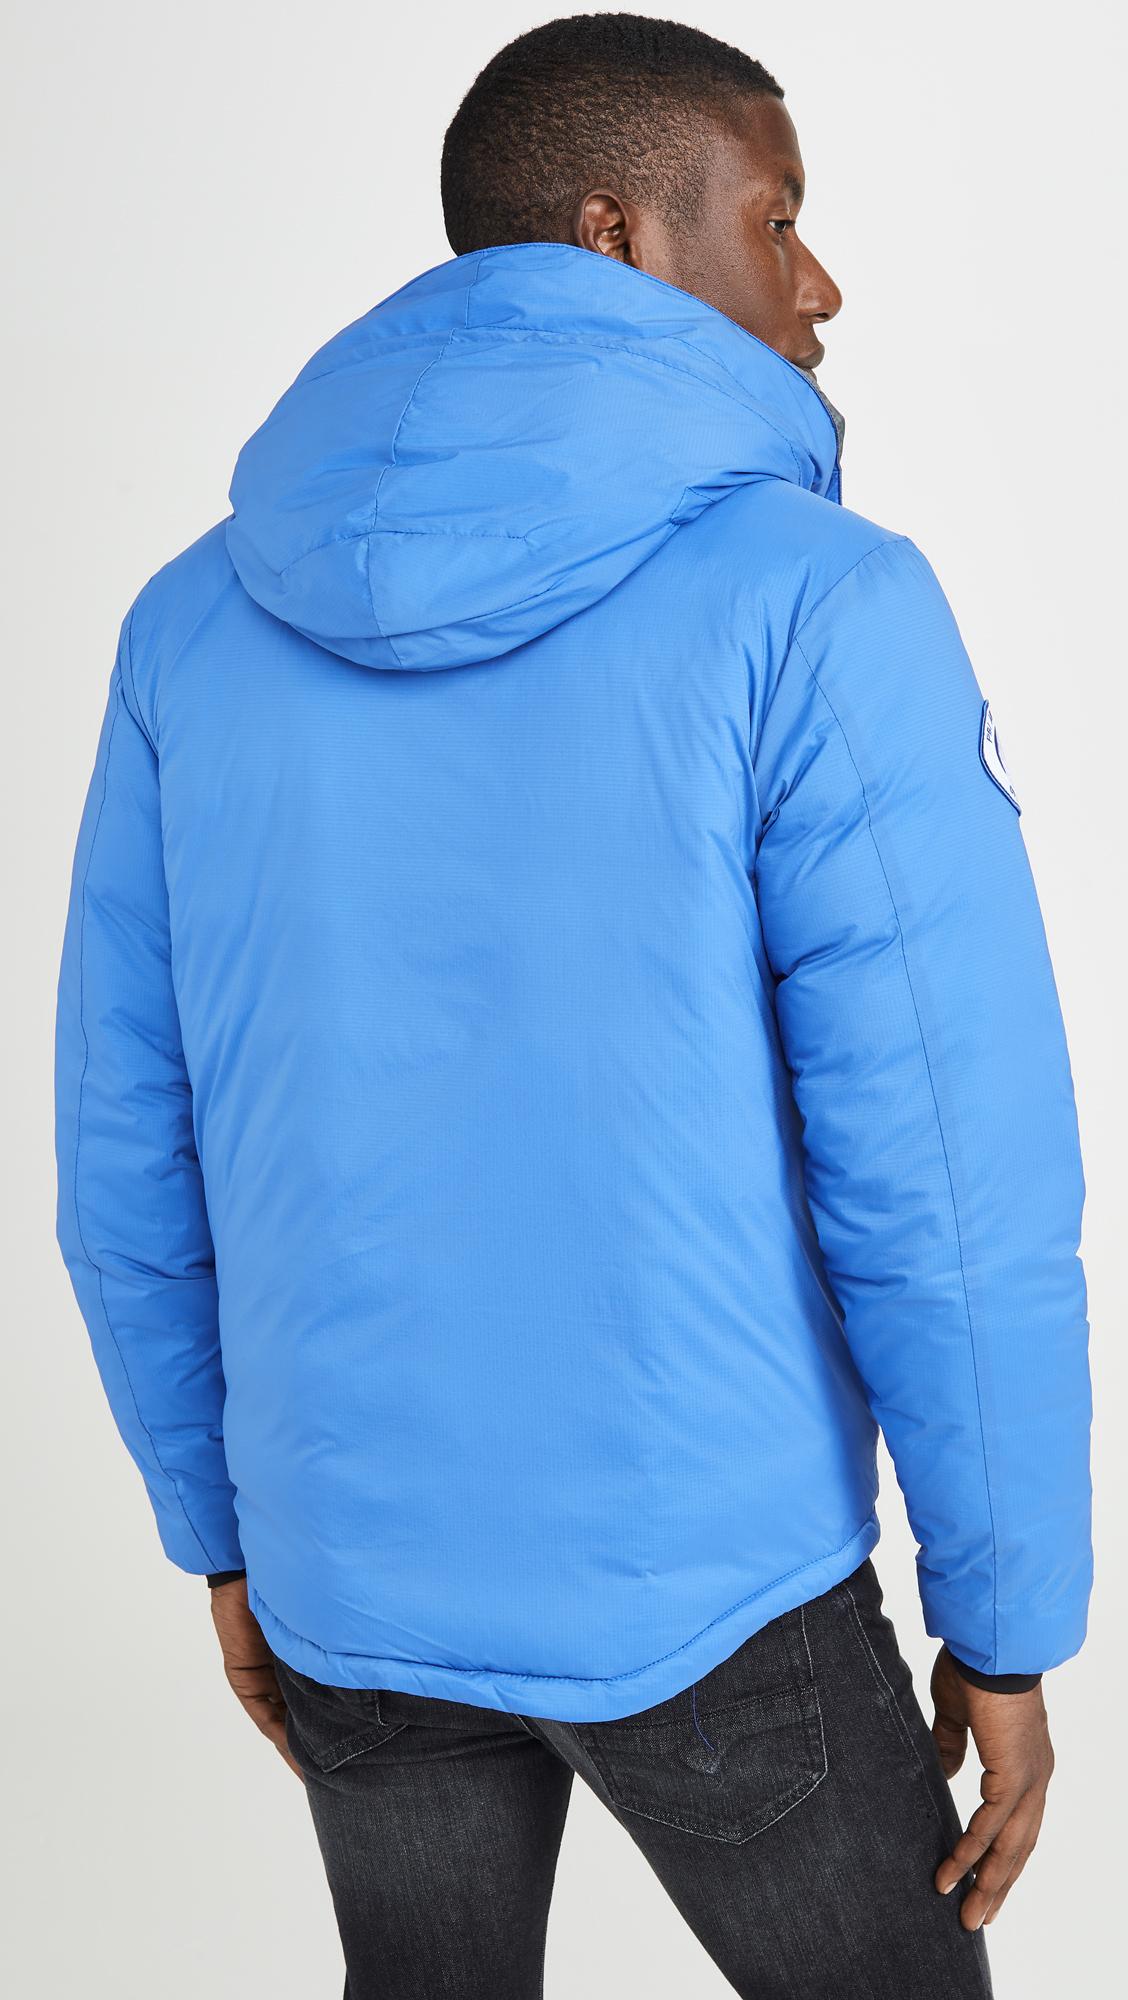 Canada Goose Synthetic Lodge Hoody Pbi in Blue for Men - Lyst